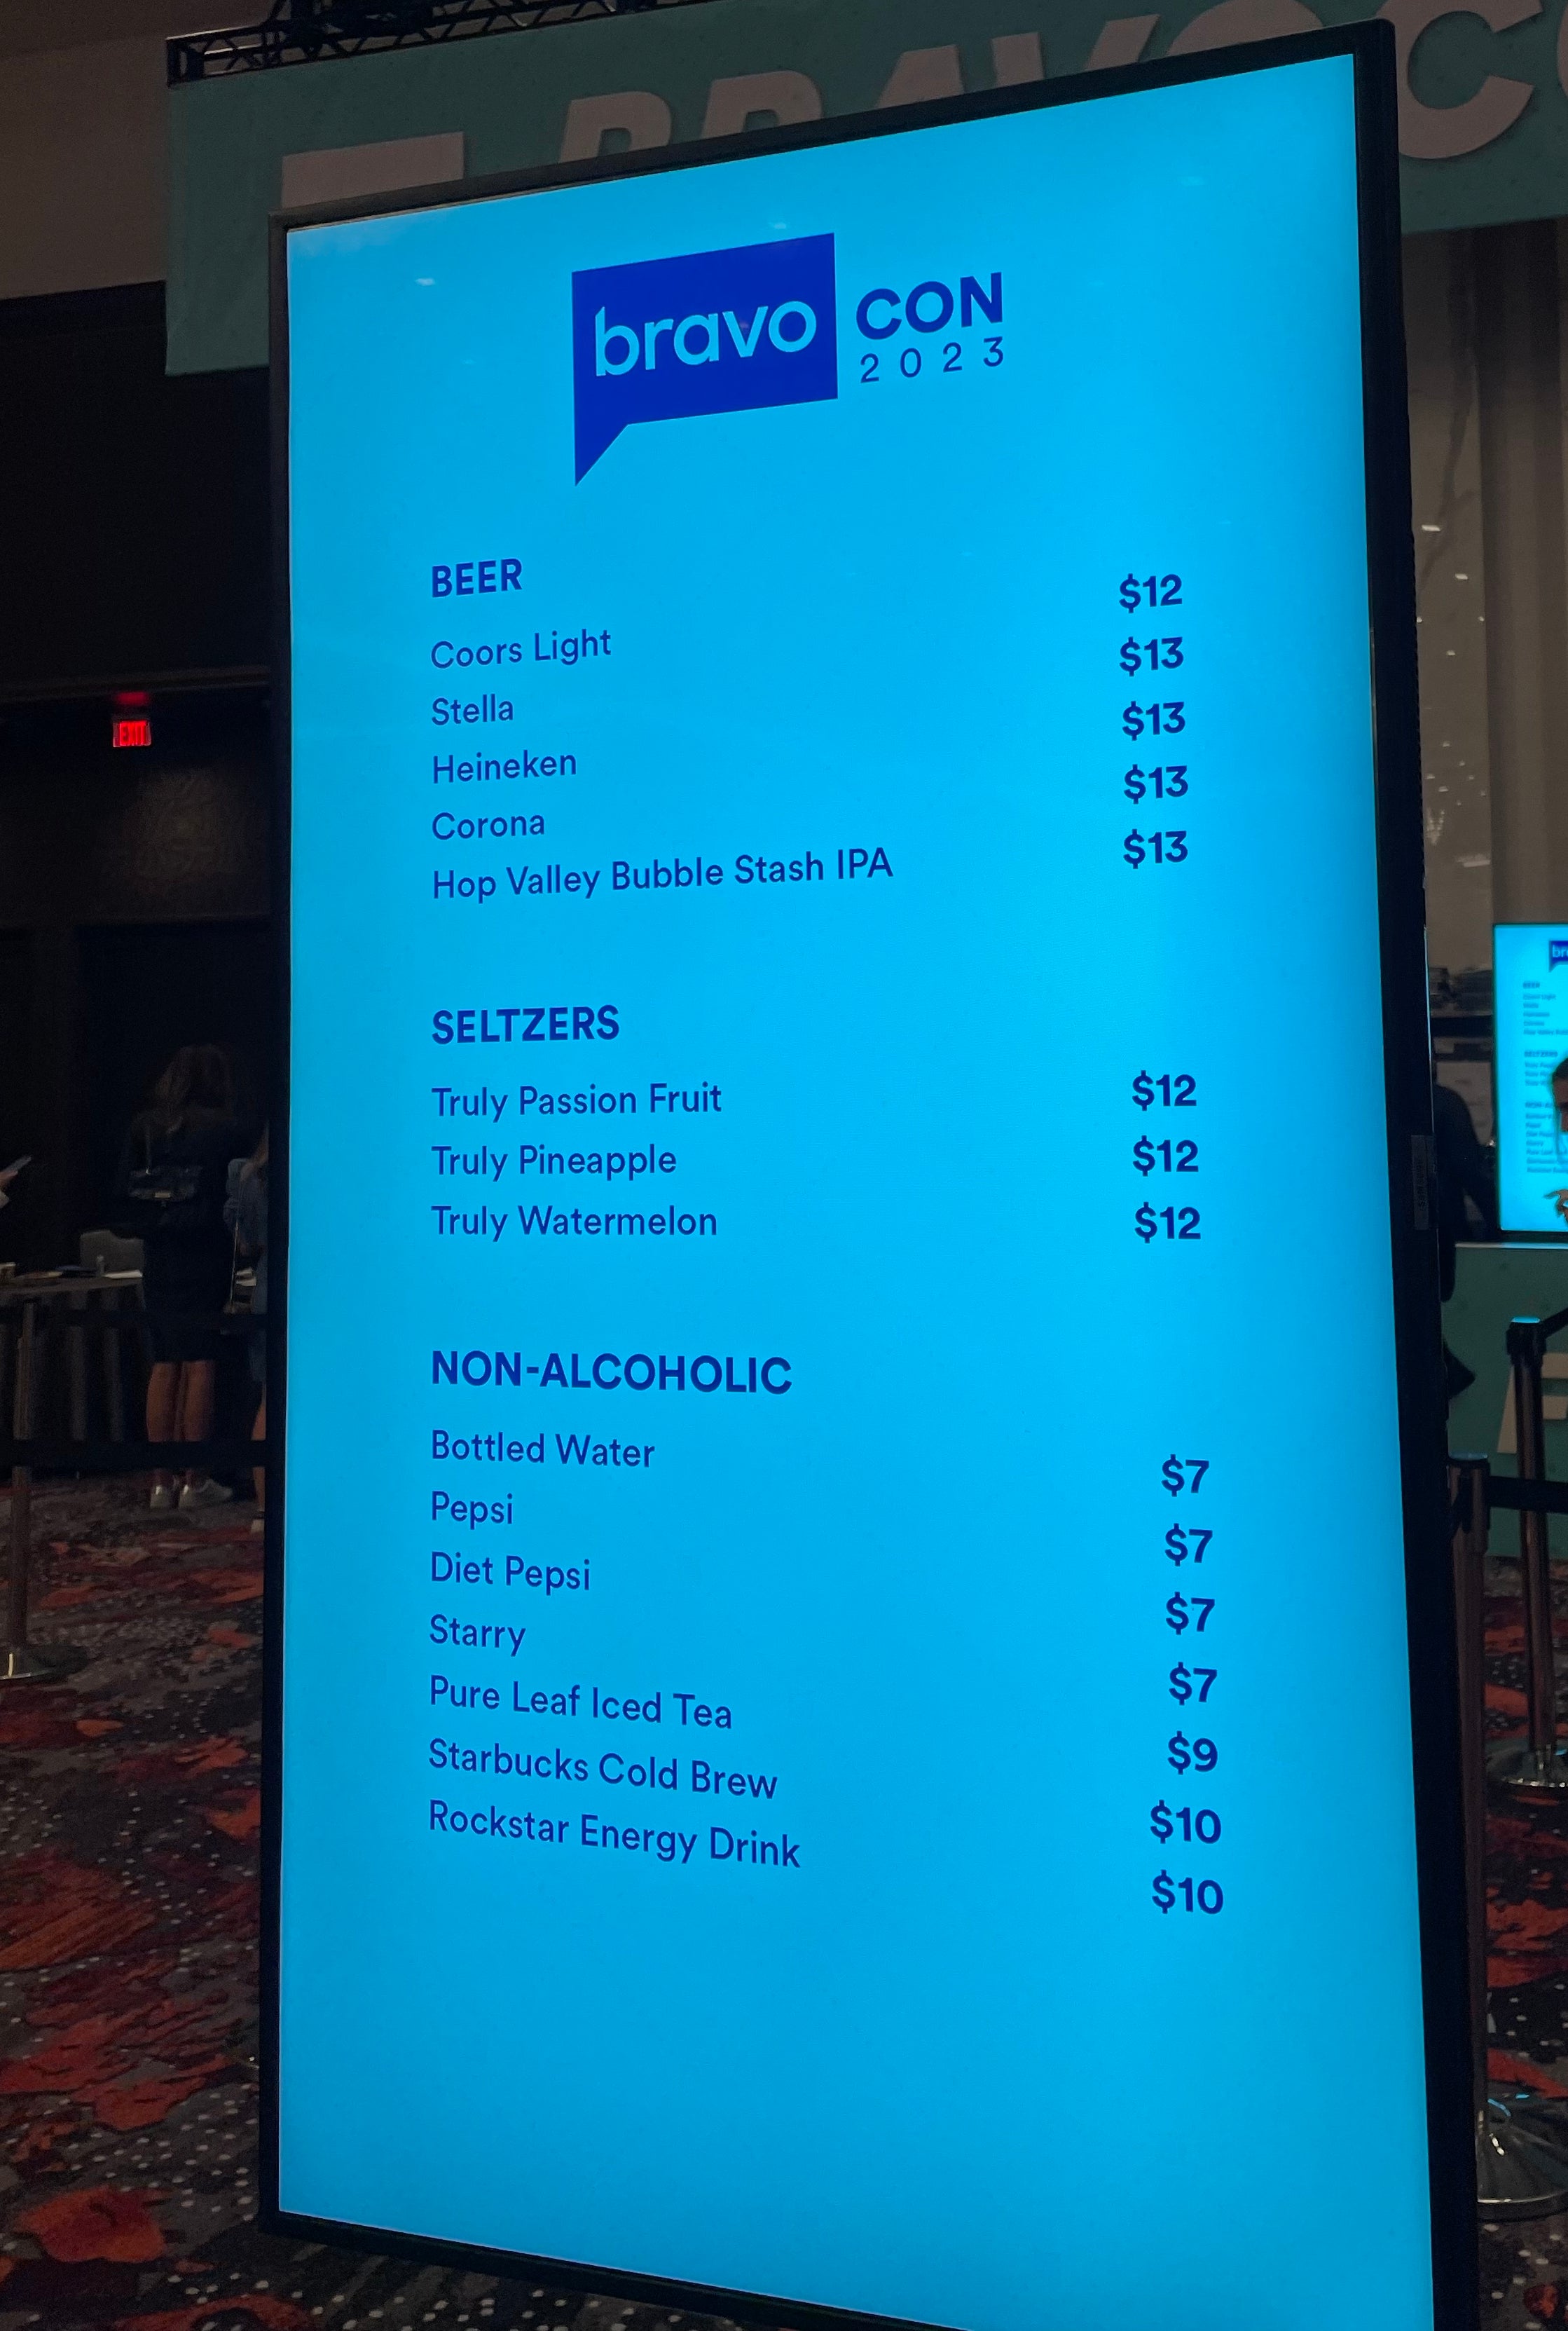 The drink menu at BravoCon, featuring $12 coors light